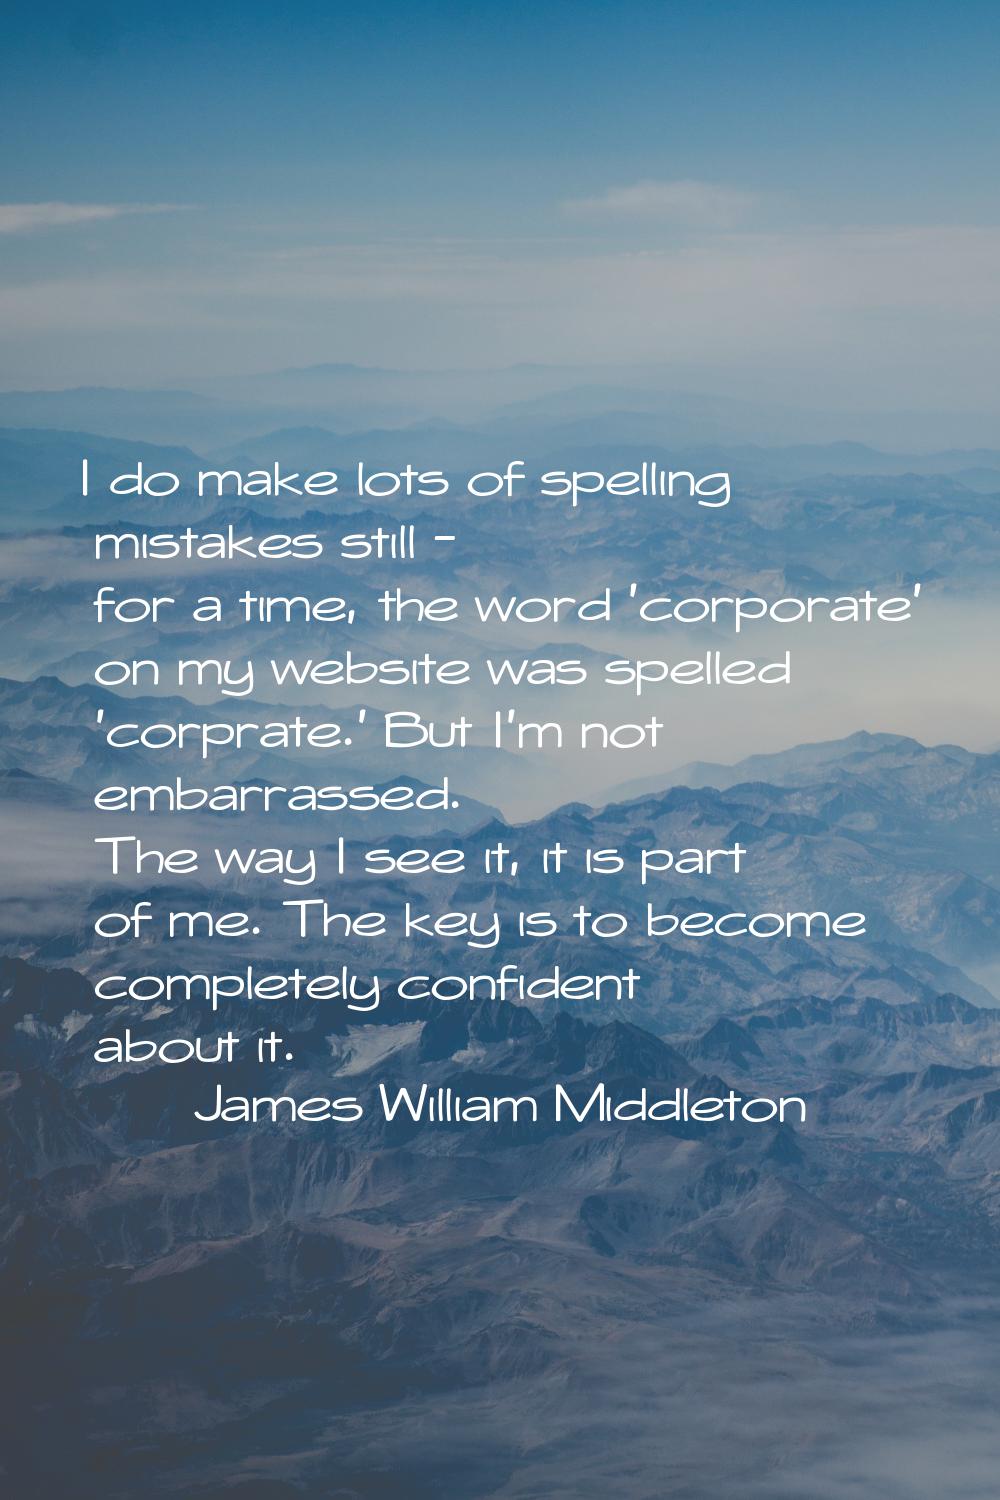 I do make lots of spelling mistakes still - for a time, the word 'corporate' on my website was spel